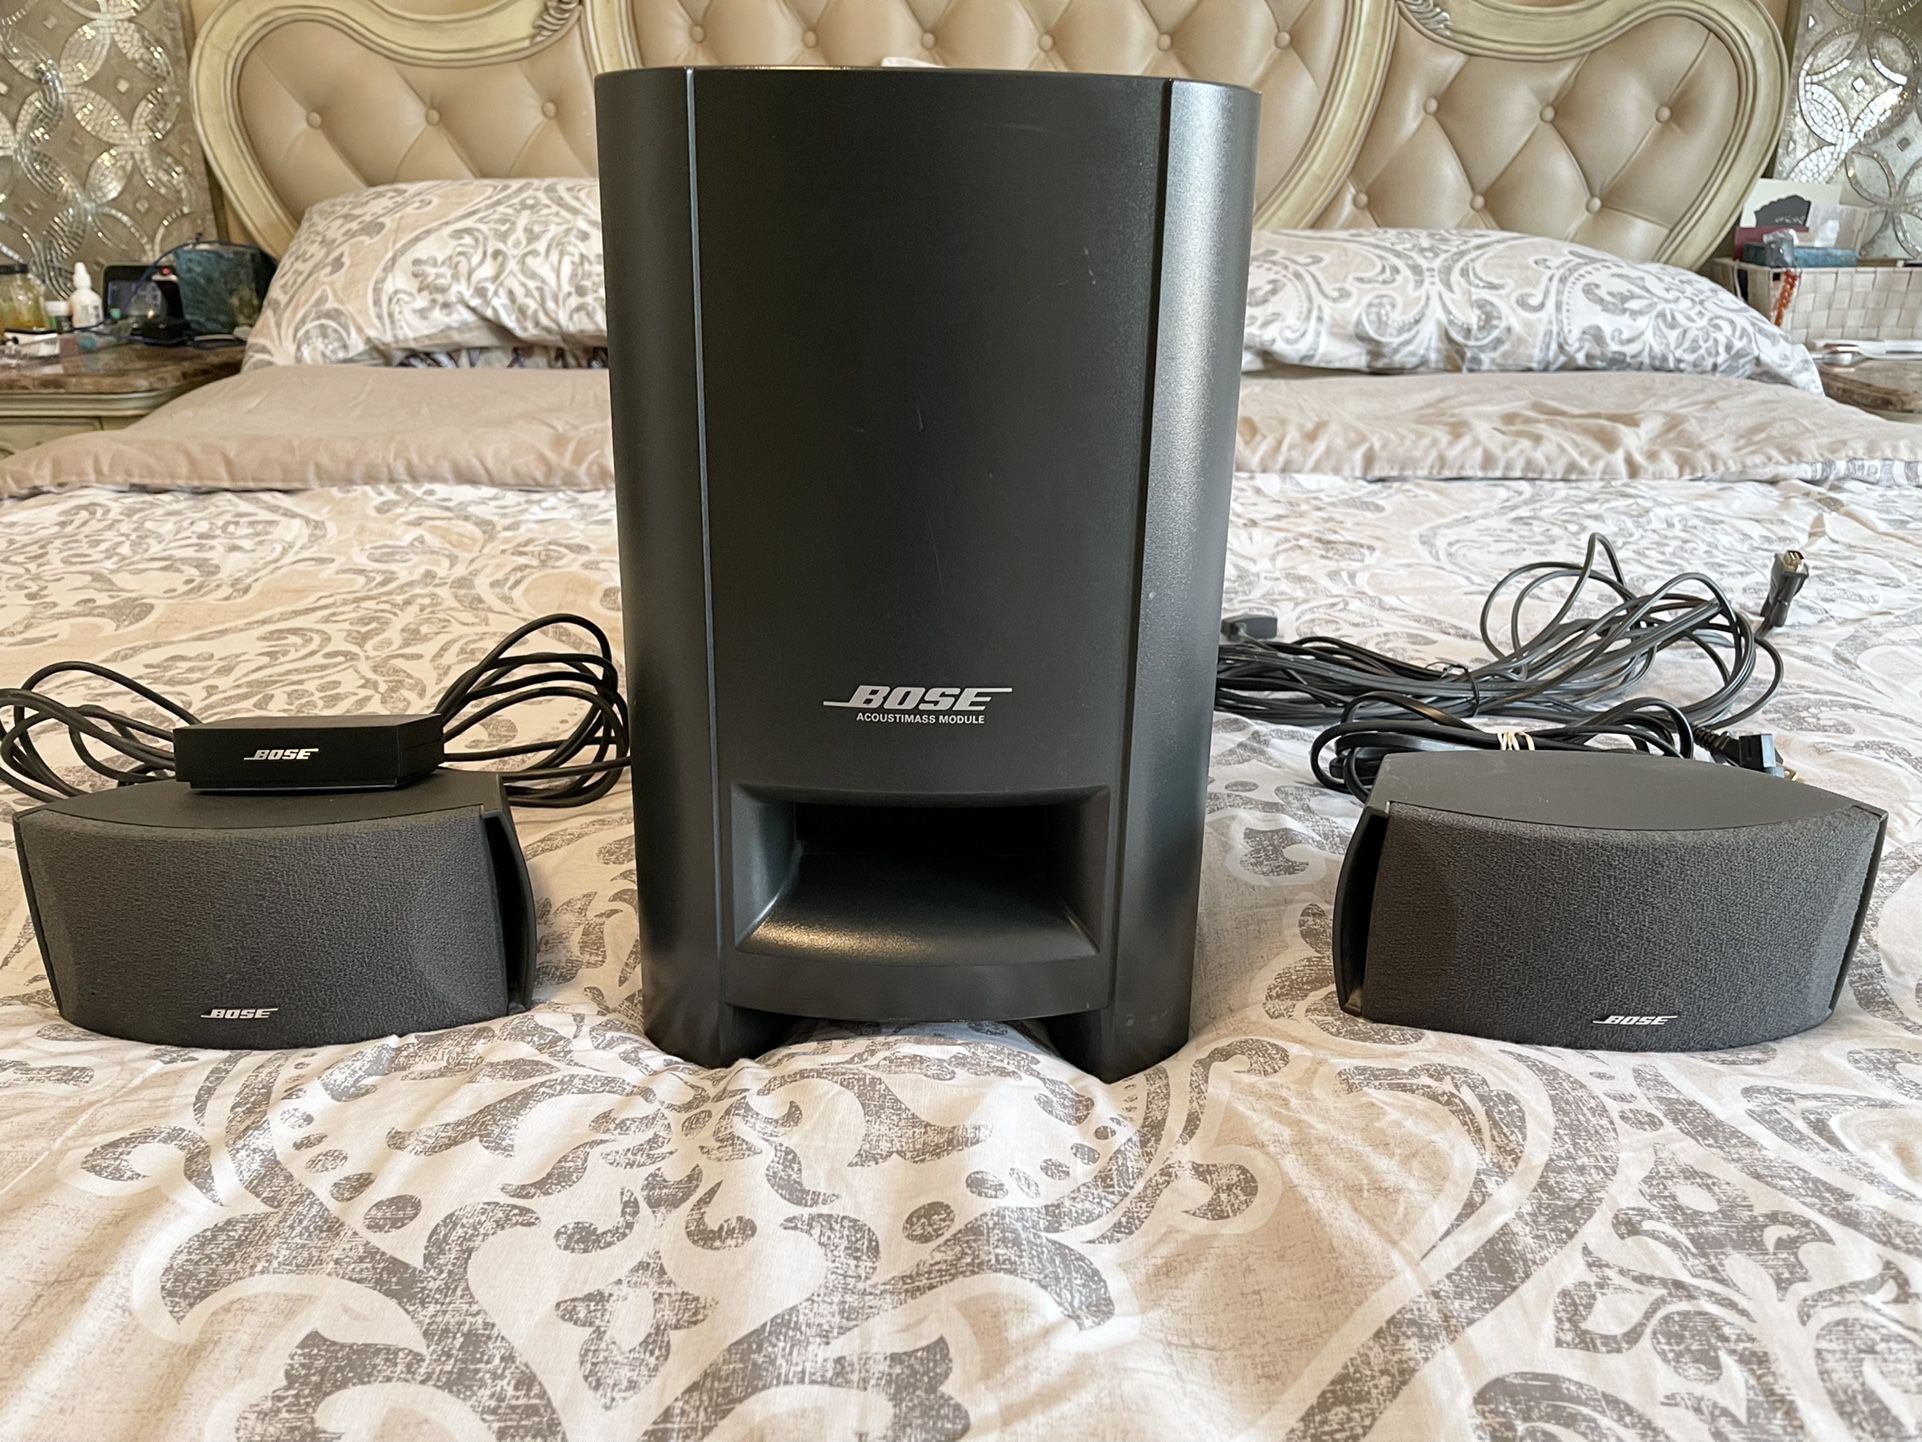 BOSE CineMate Digital Home Theater Speakers System